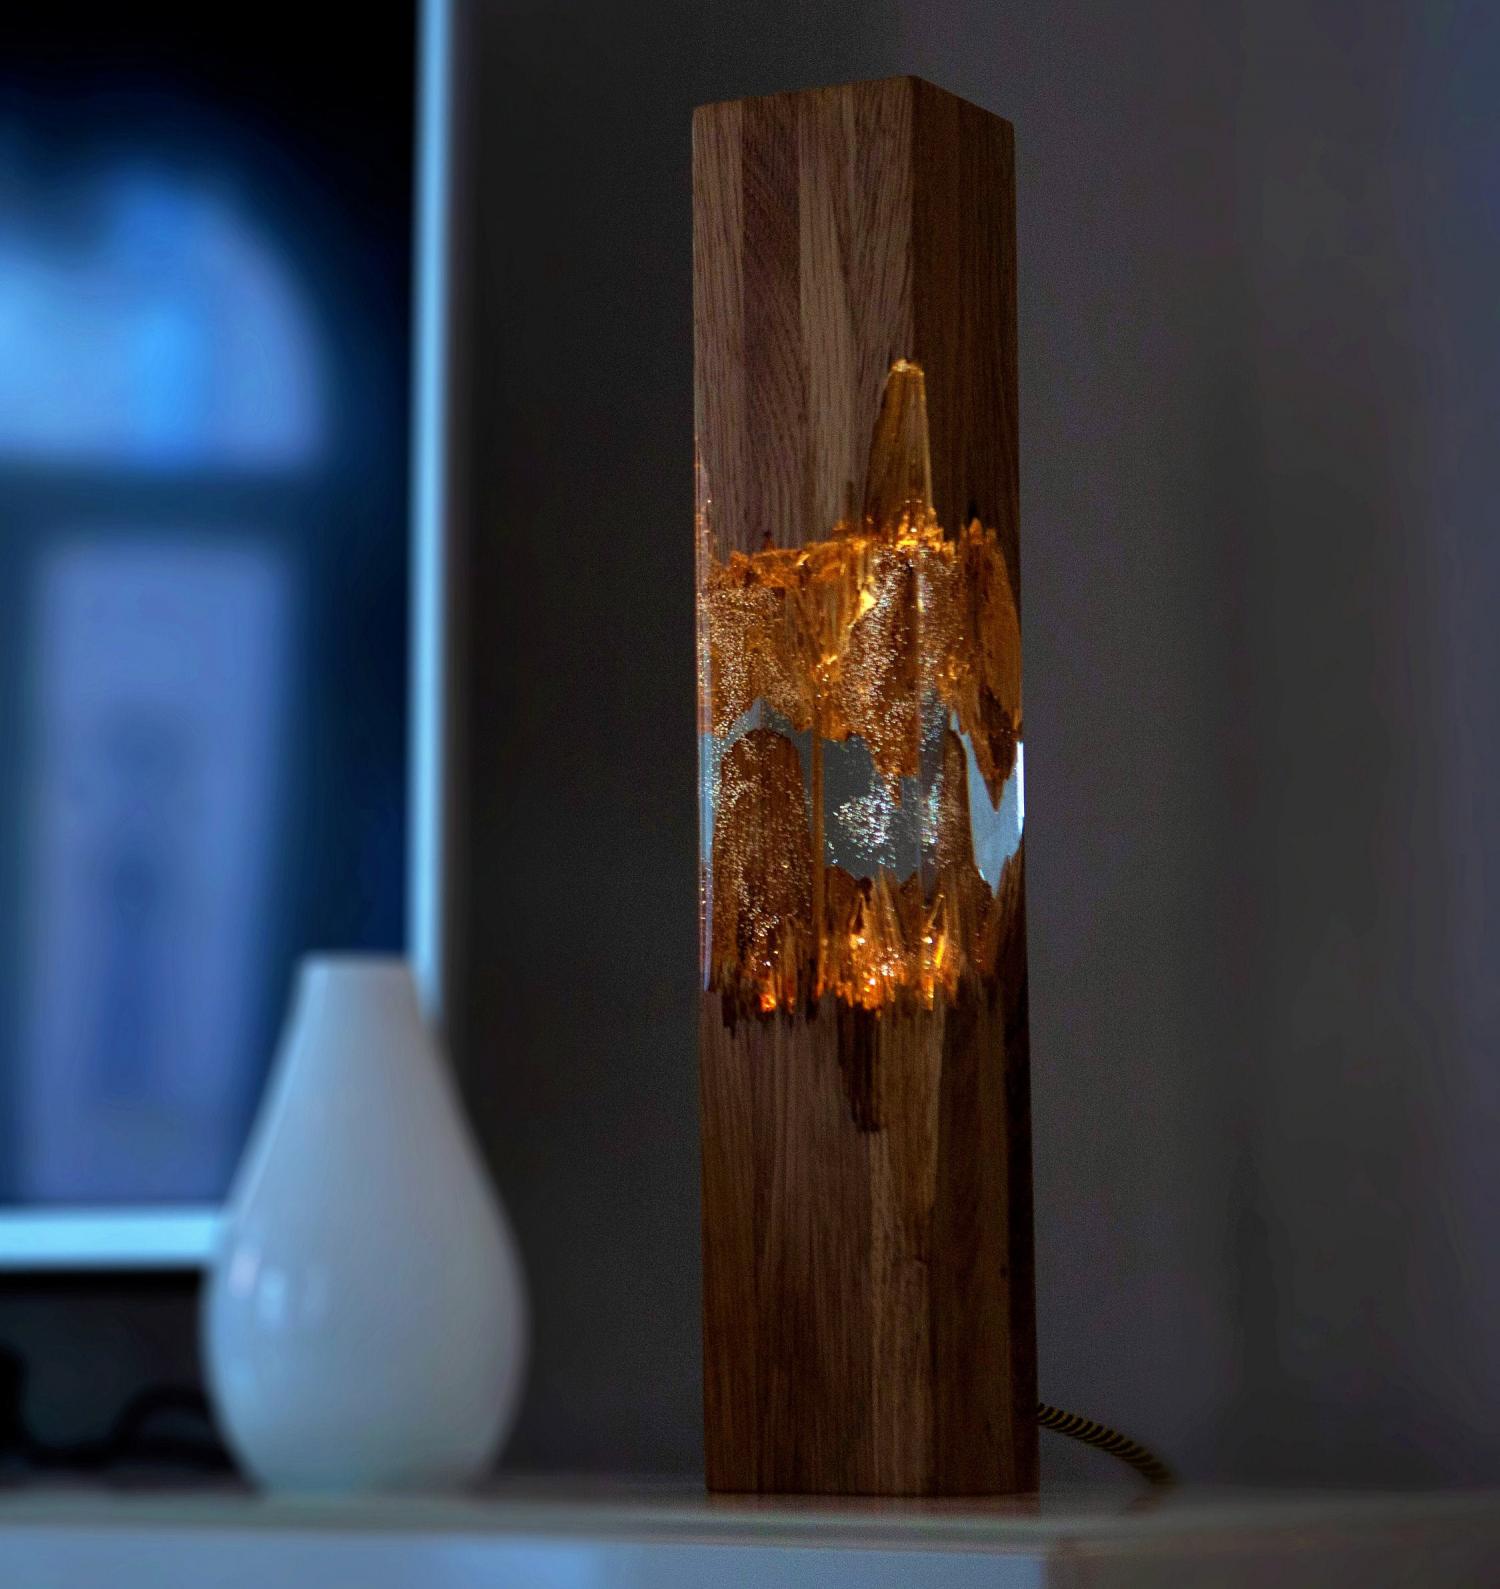 Beautiful Epoxy Wooden Lamps Made From a Broken Piece of Wood